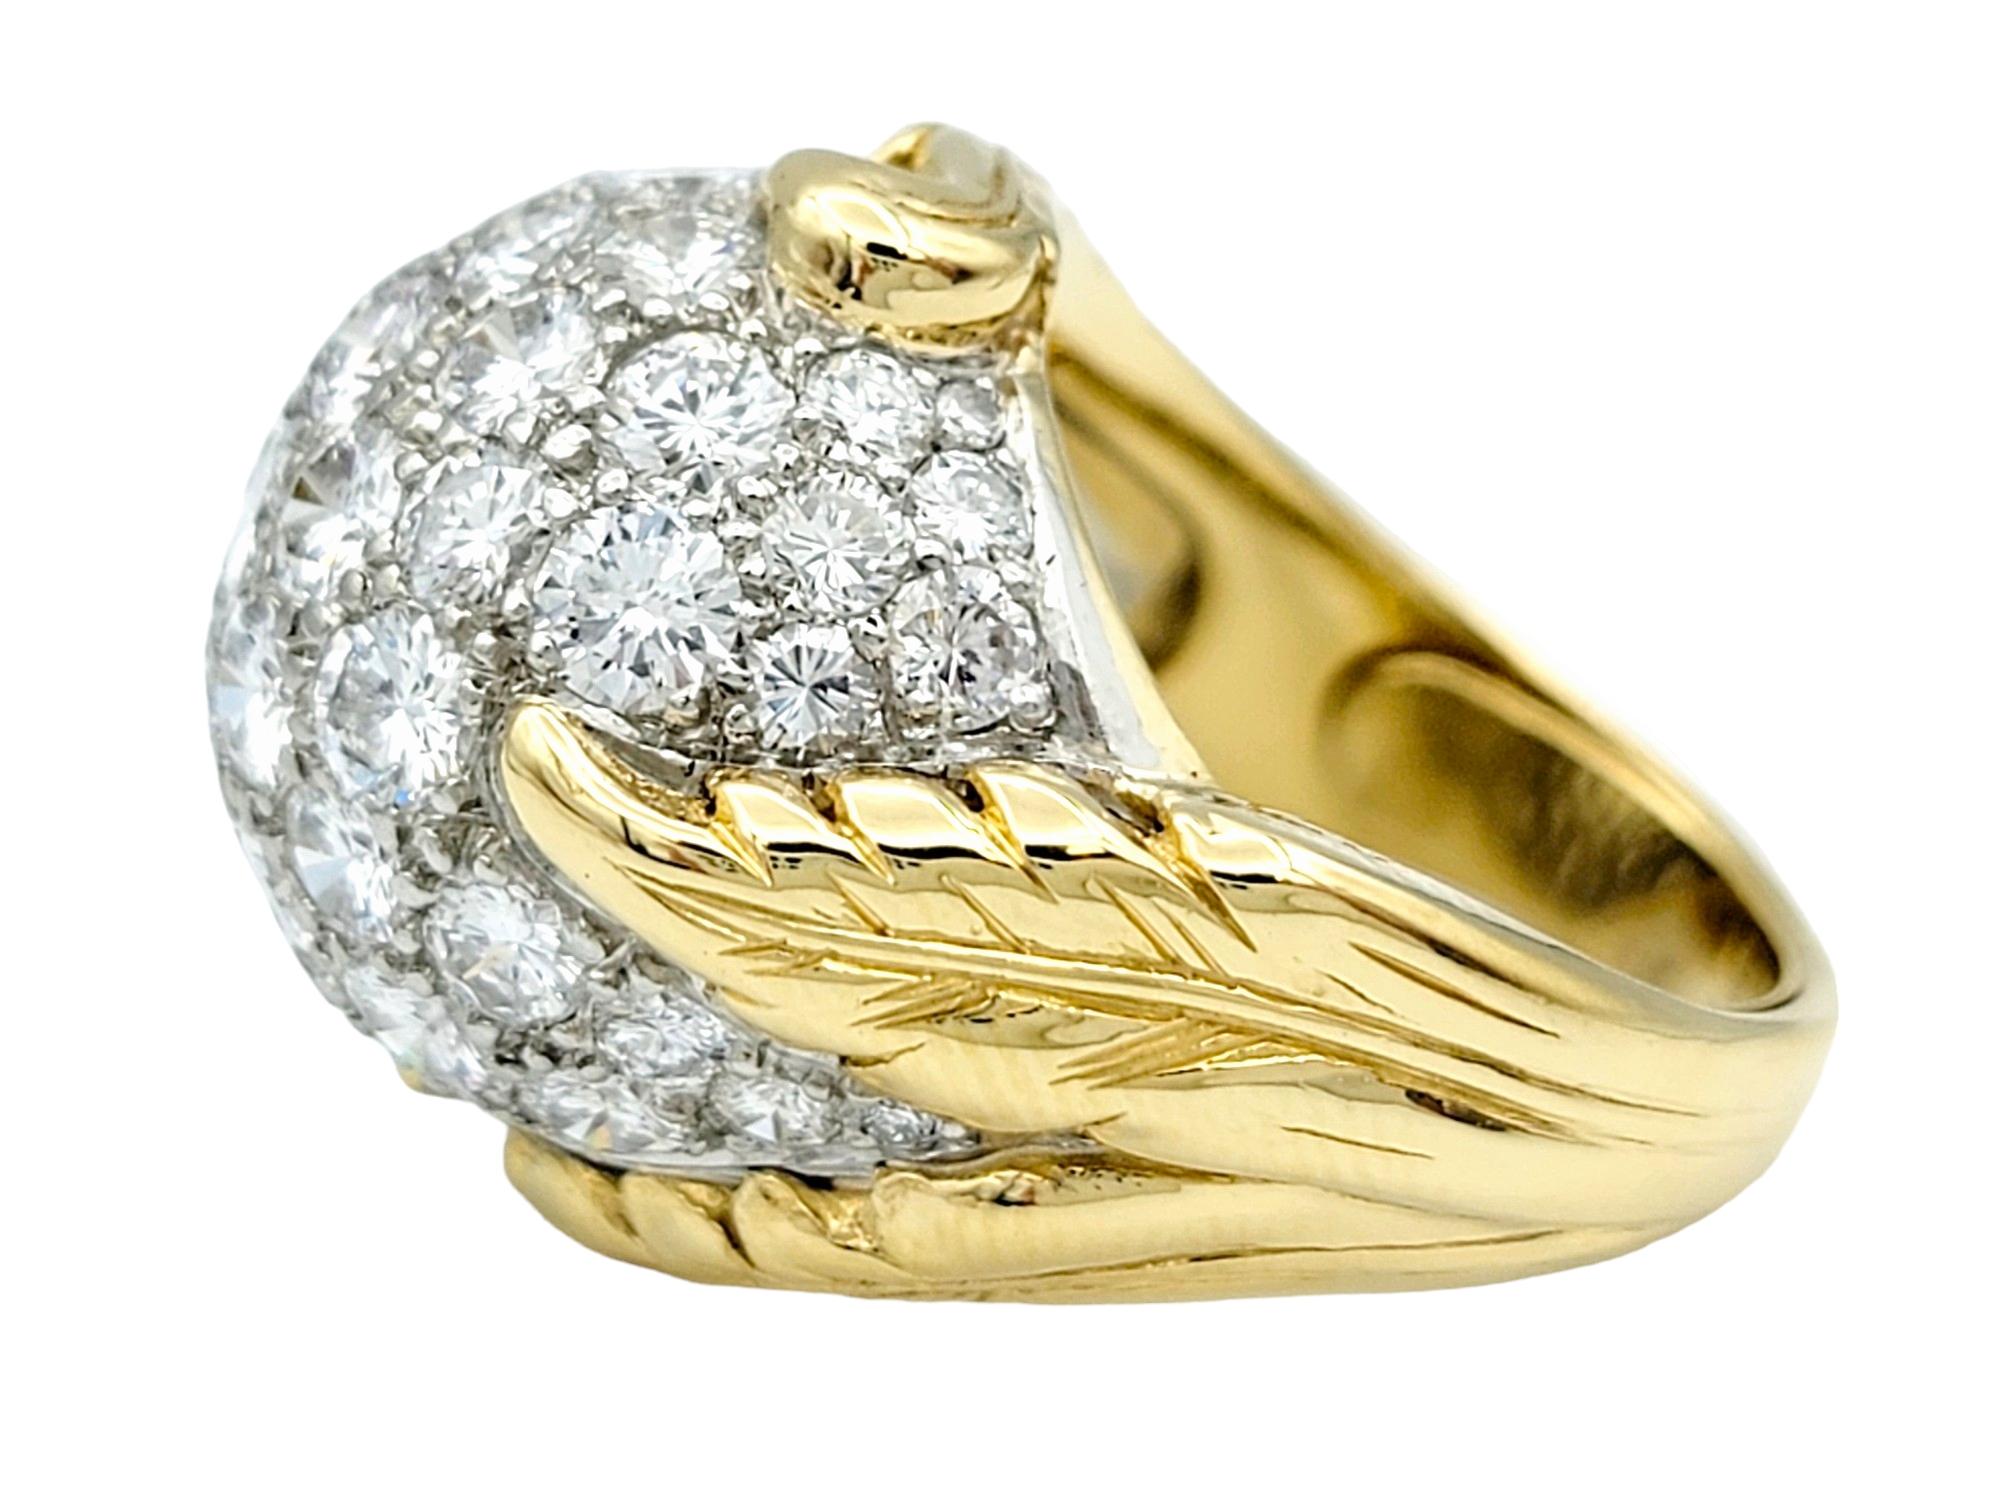 4.00 Carat Total Diamond Domed Cocktail Ring with Leaf Motif in 18 Karat Gold In Good Condition For Sale In Scottsdale, AZ